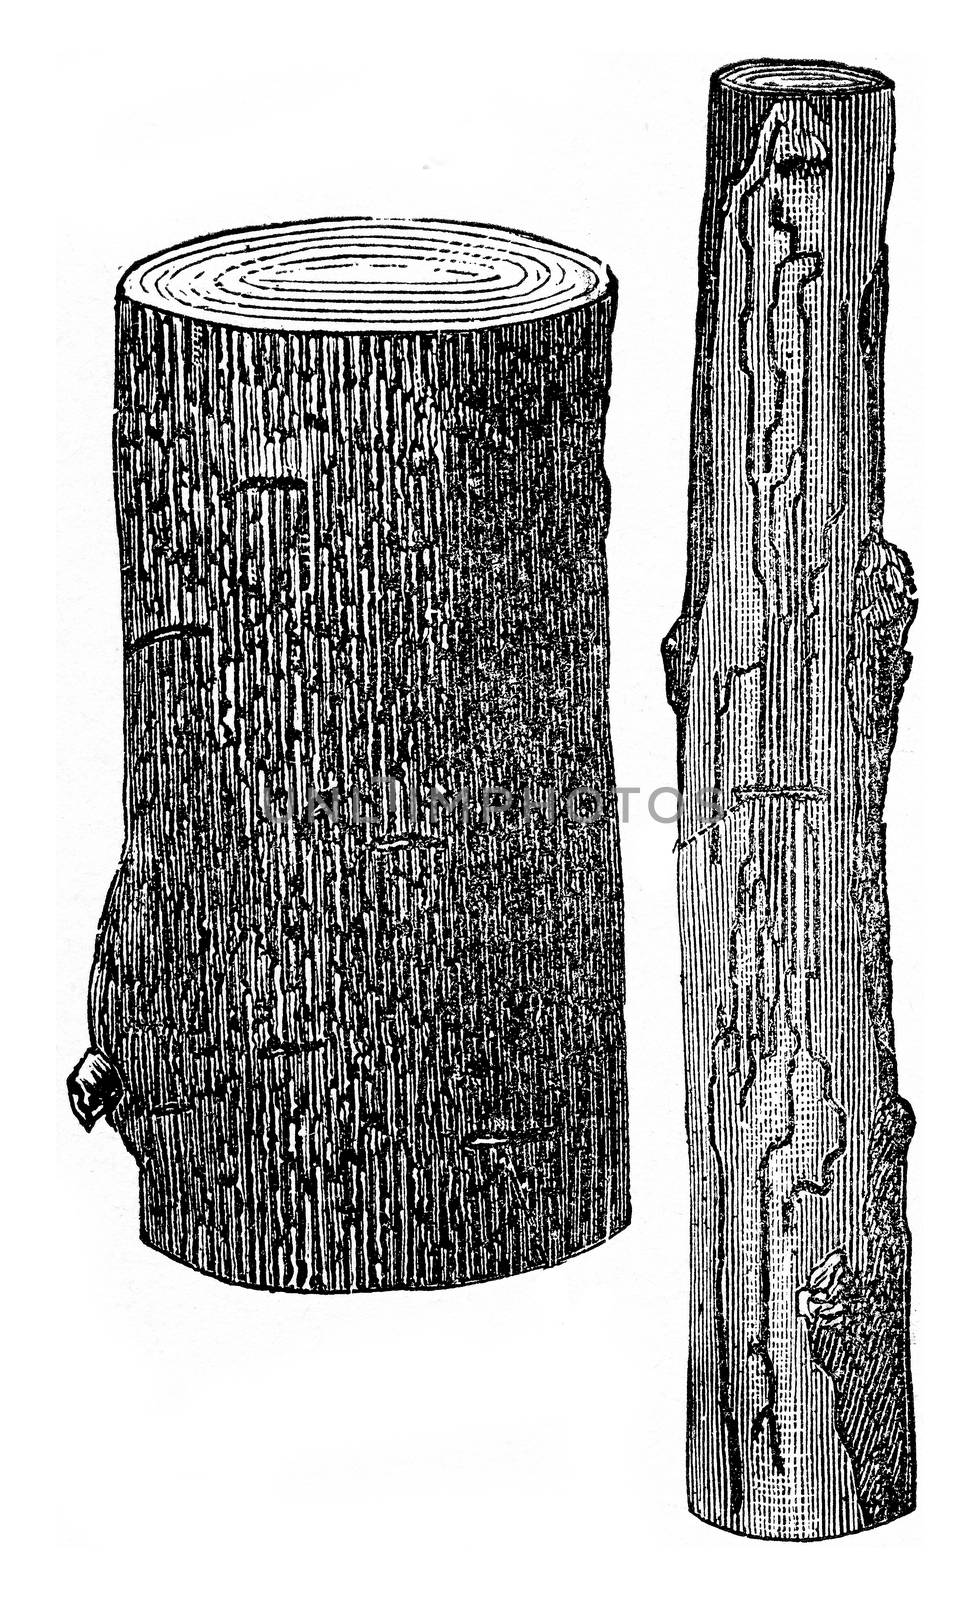 Damage products on the Oak by the Scolytus intricatus, vintage engraved illustration.
